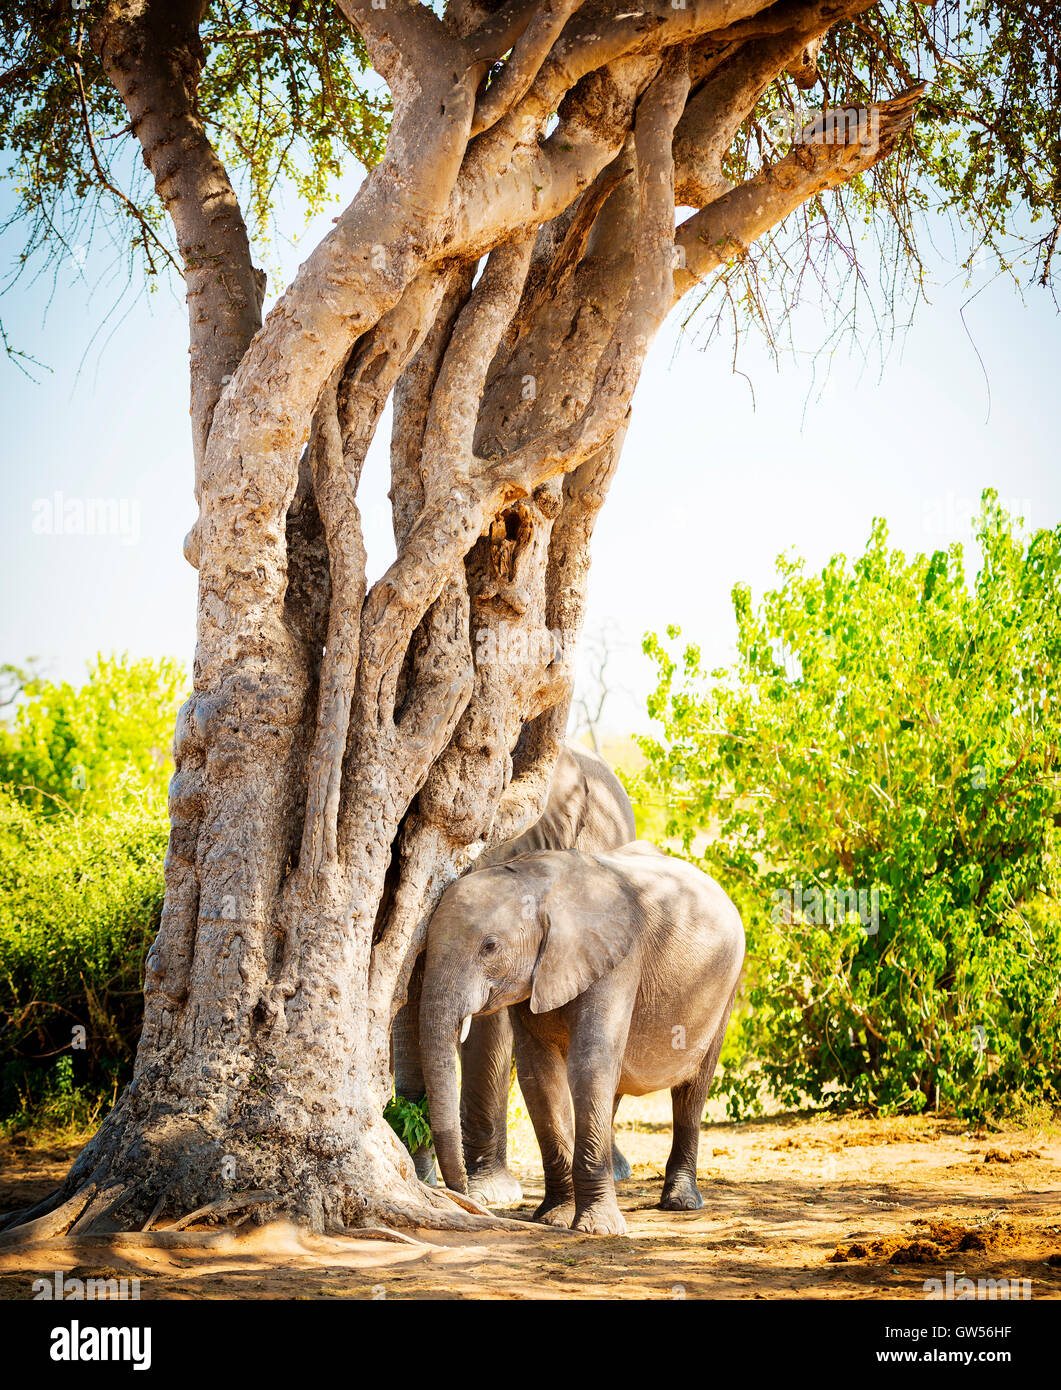 Elephants hiding trees you why do in never see How come